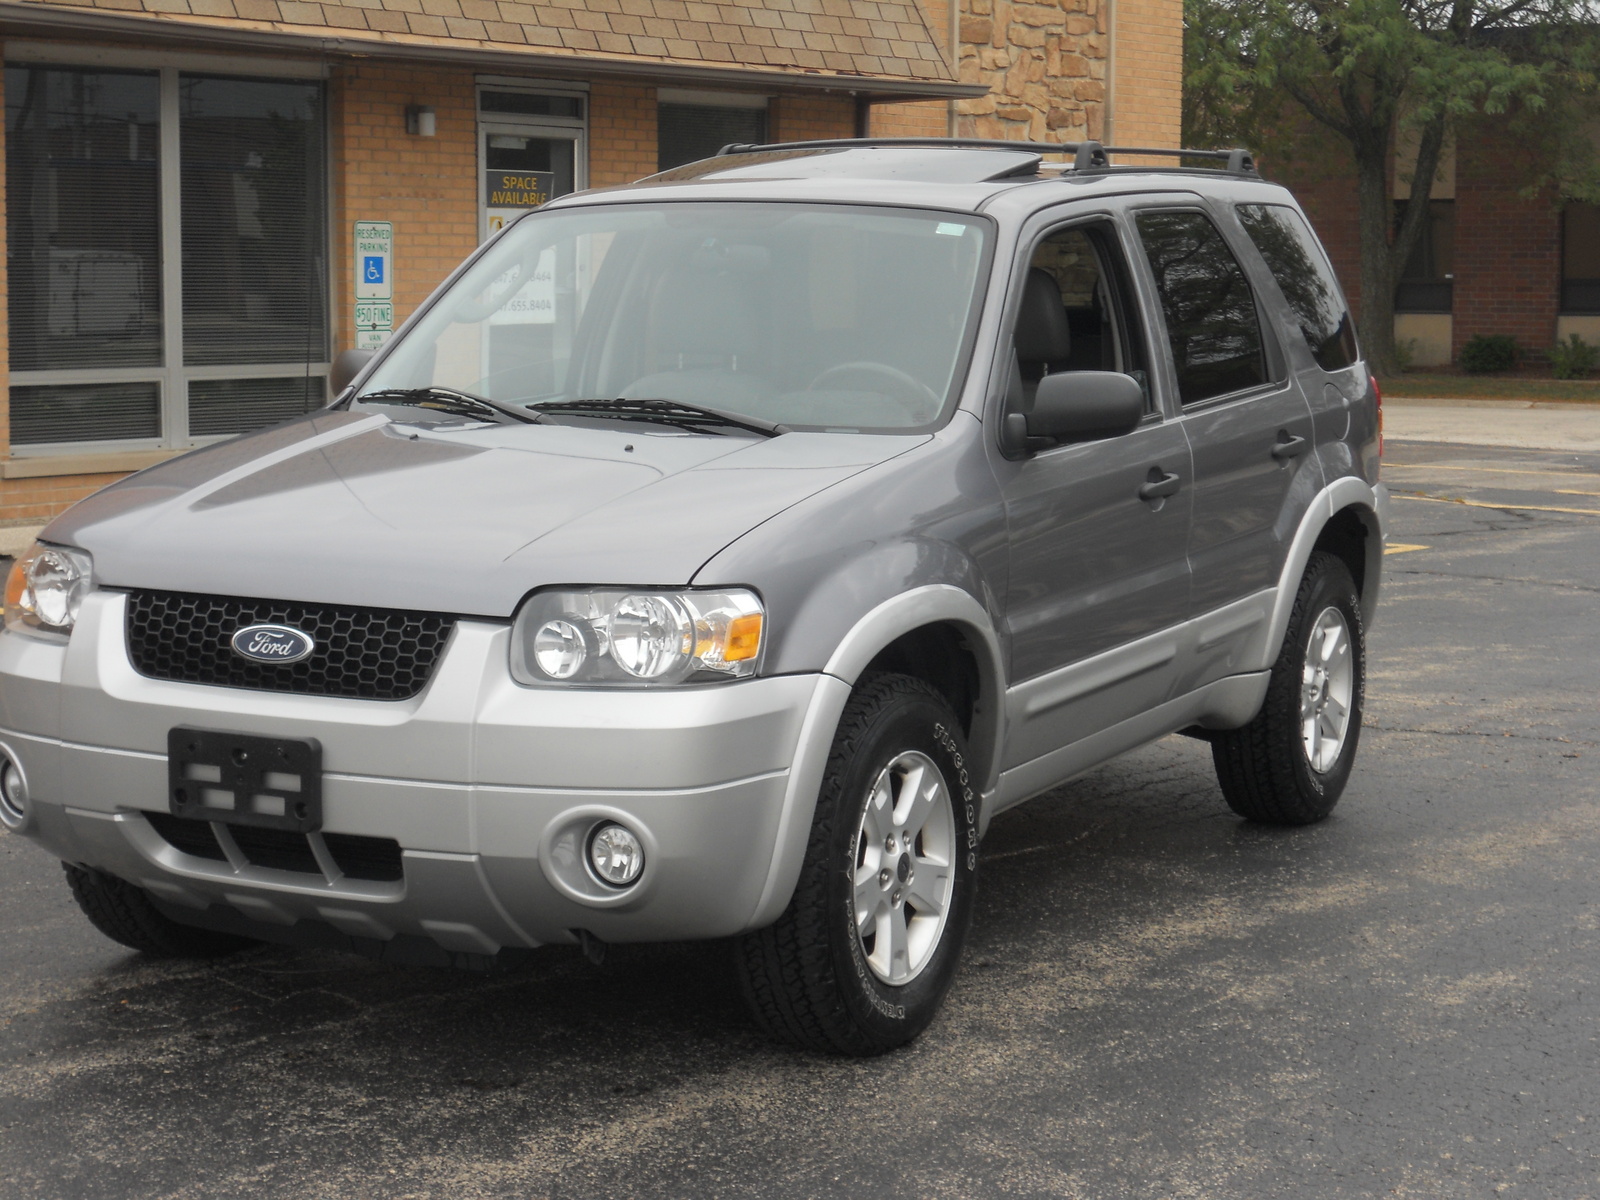 2007 Ford escape xlt safety rating